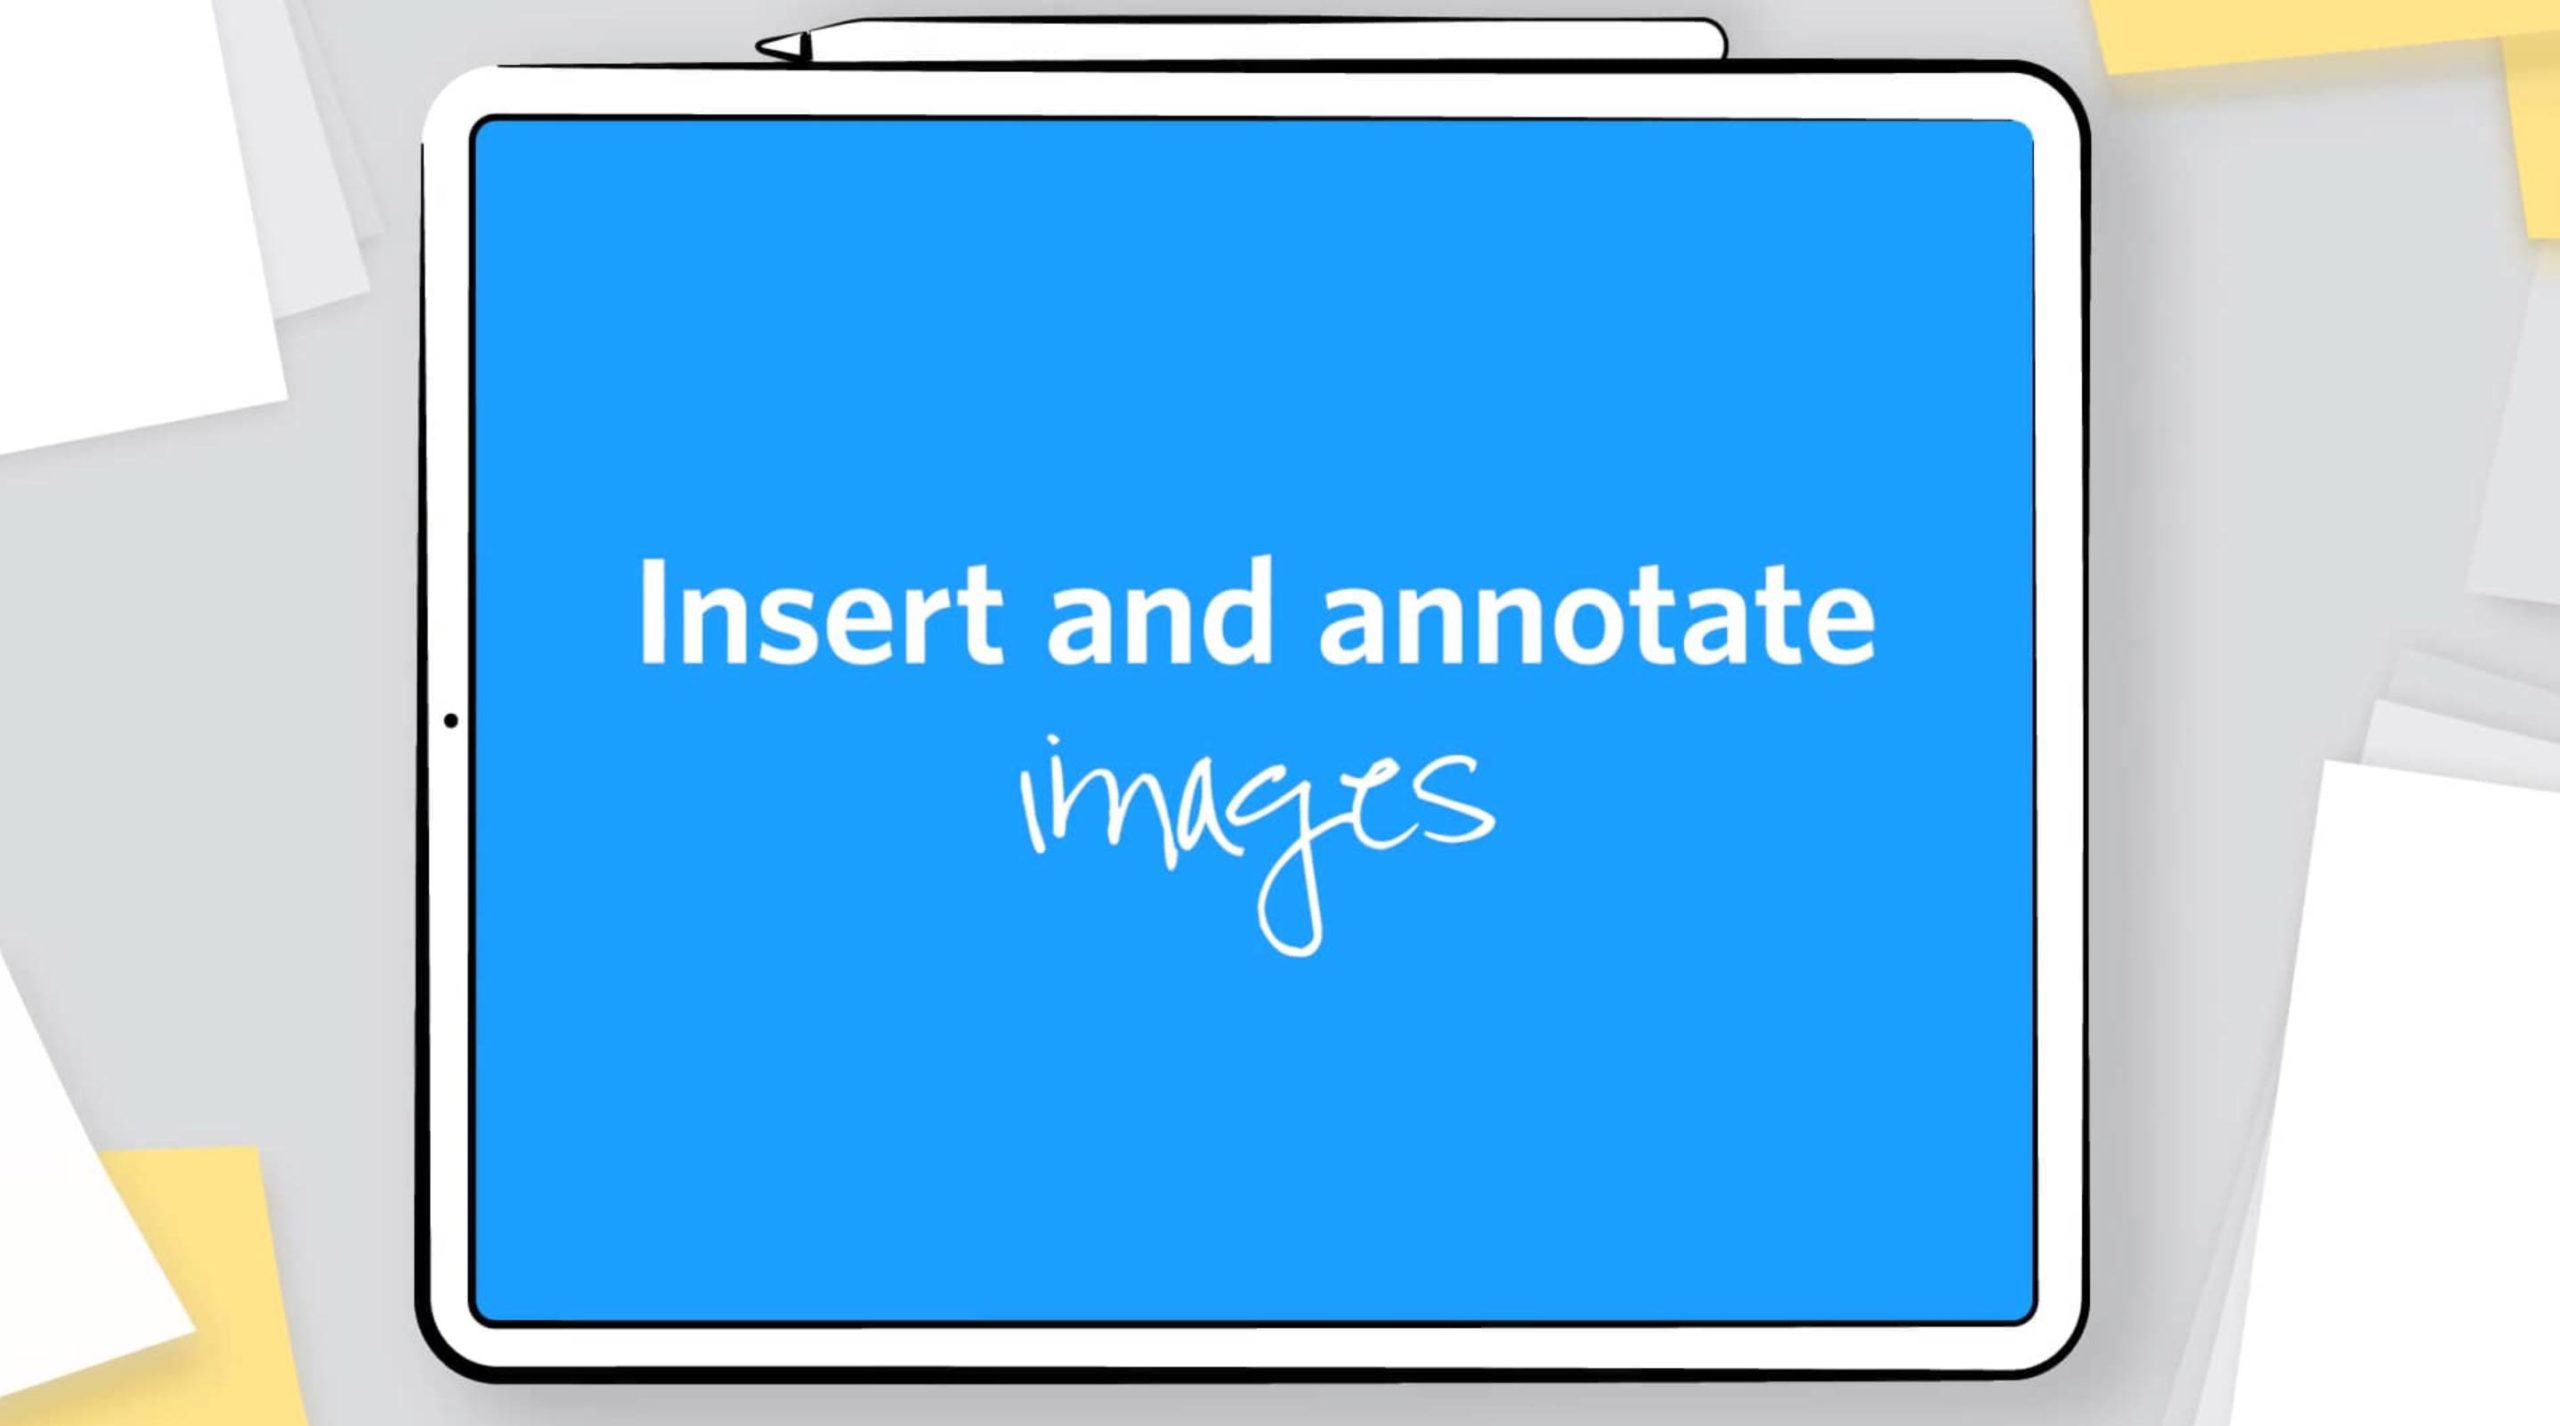 Insert and annotate images